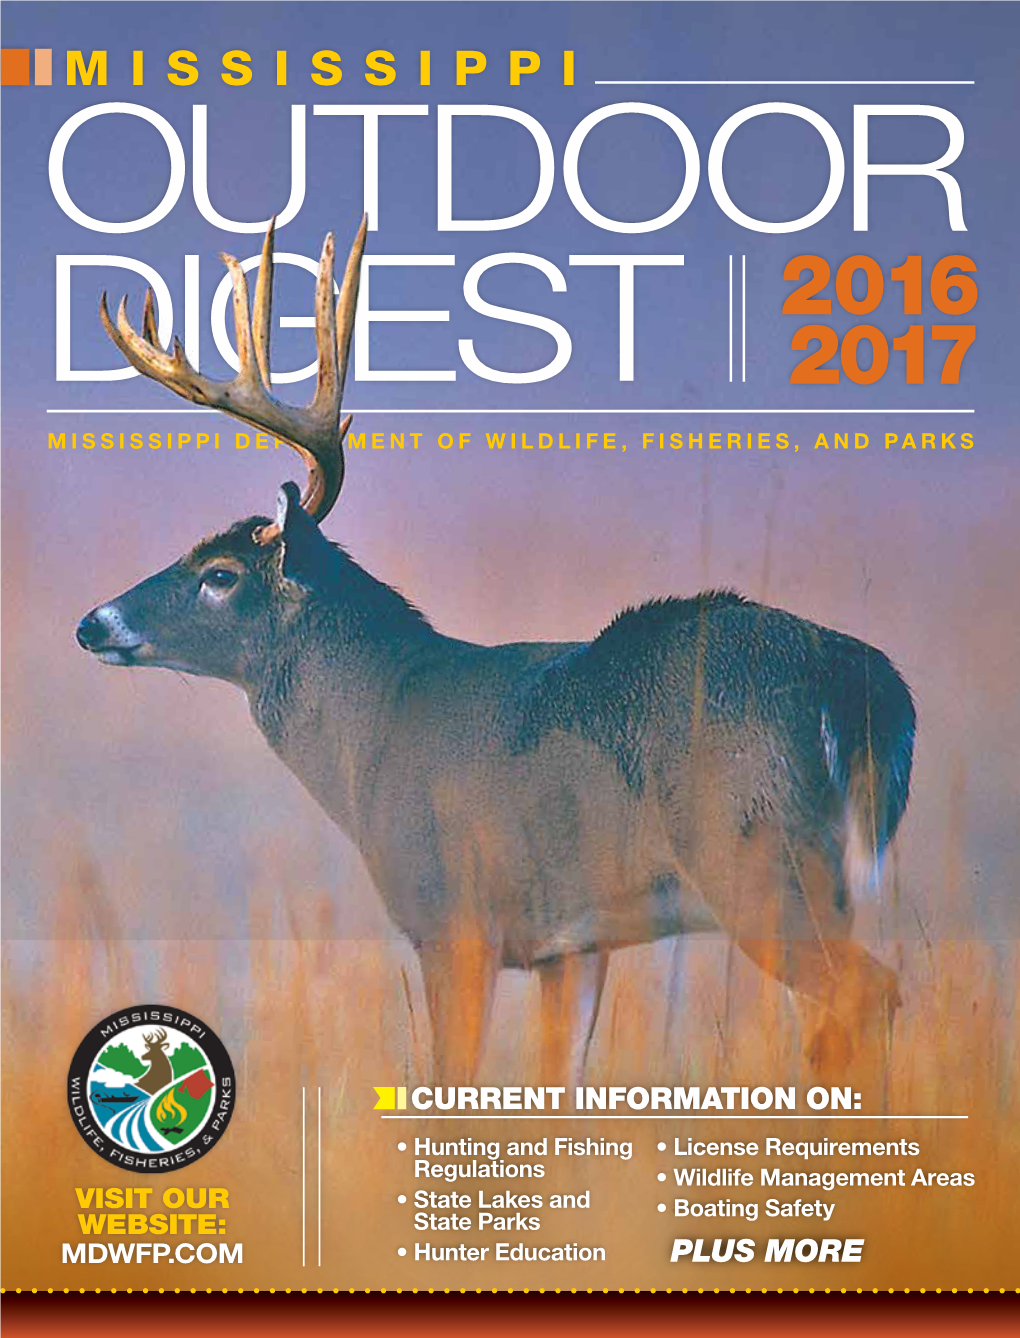 Mississippi Outdoor 2016 Digest 2017 Mississippi Department of Wildlife, Fisheries, and Parks